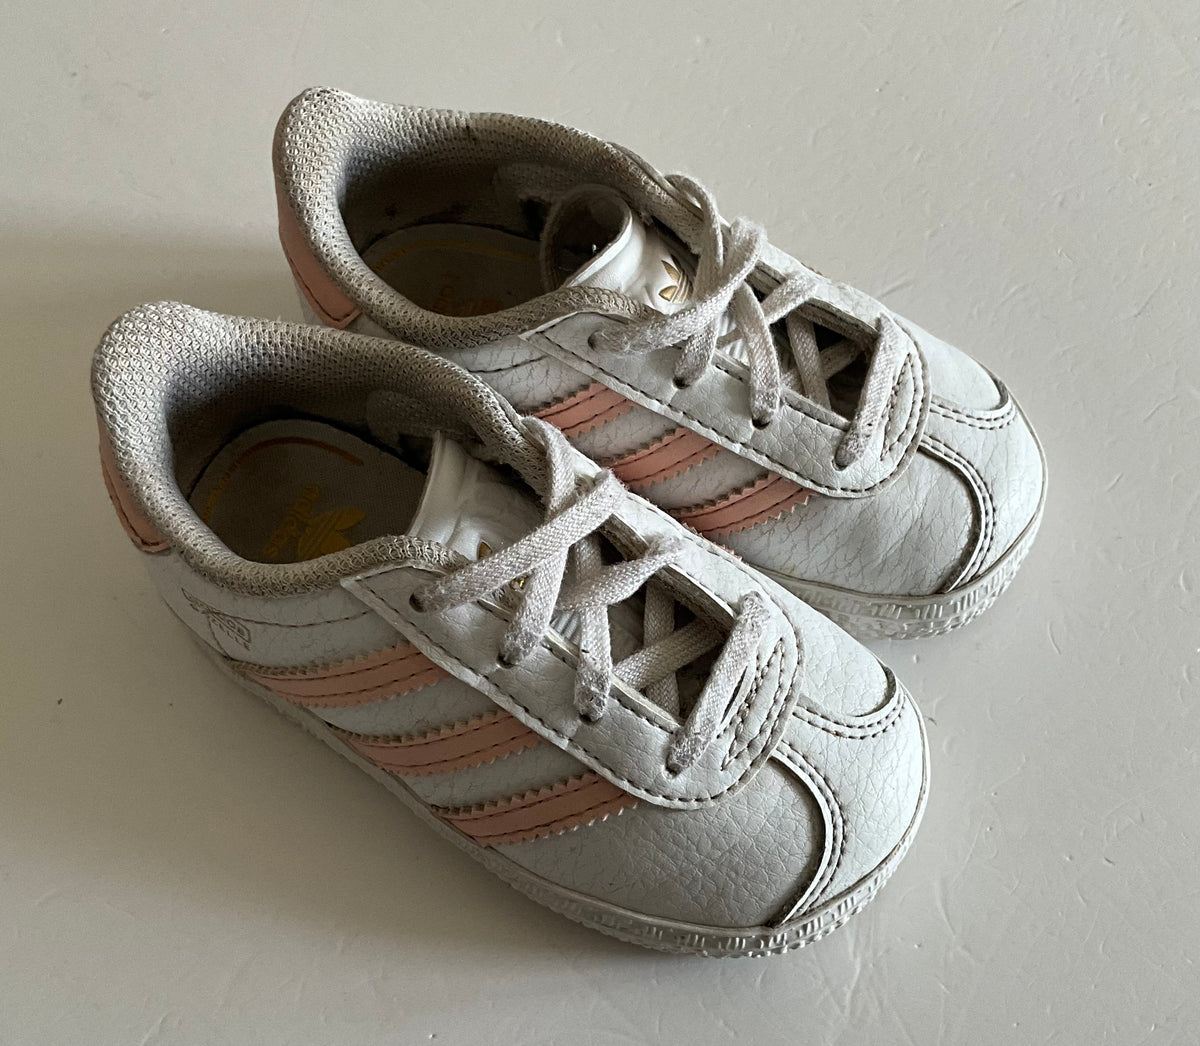 Adidas Trainers, Girls Infant Size 4